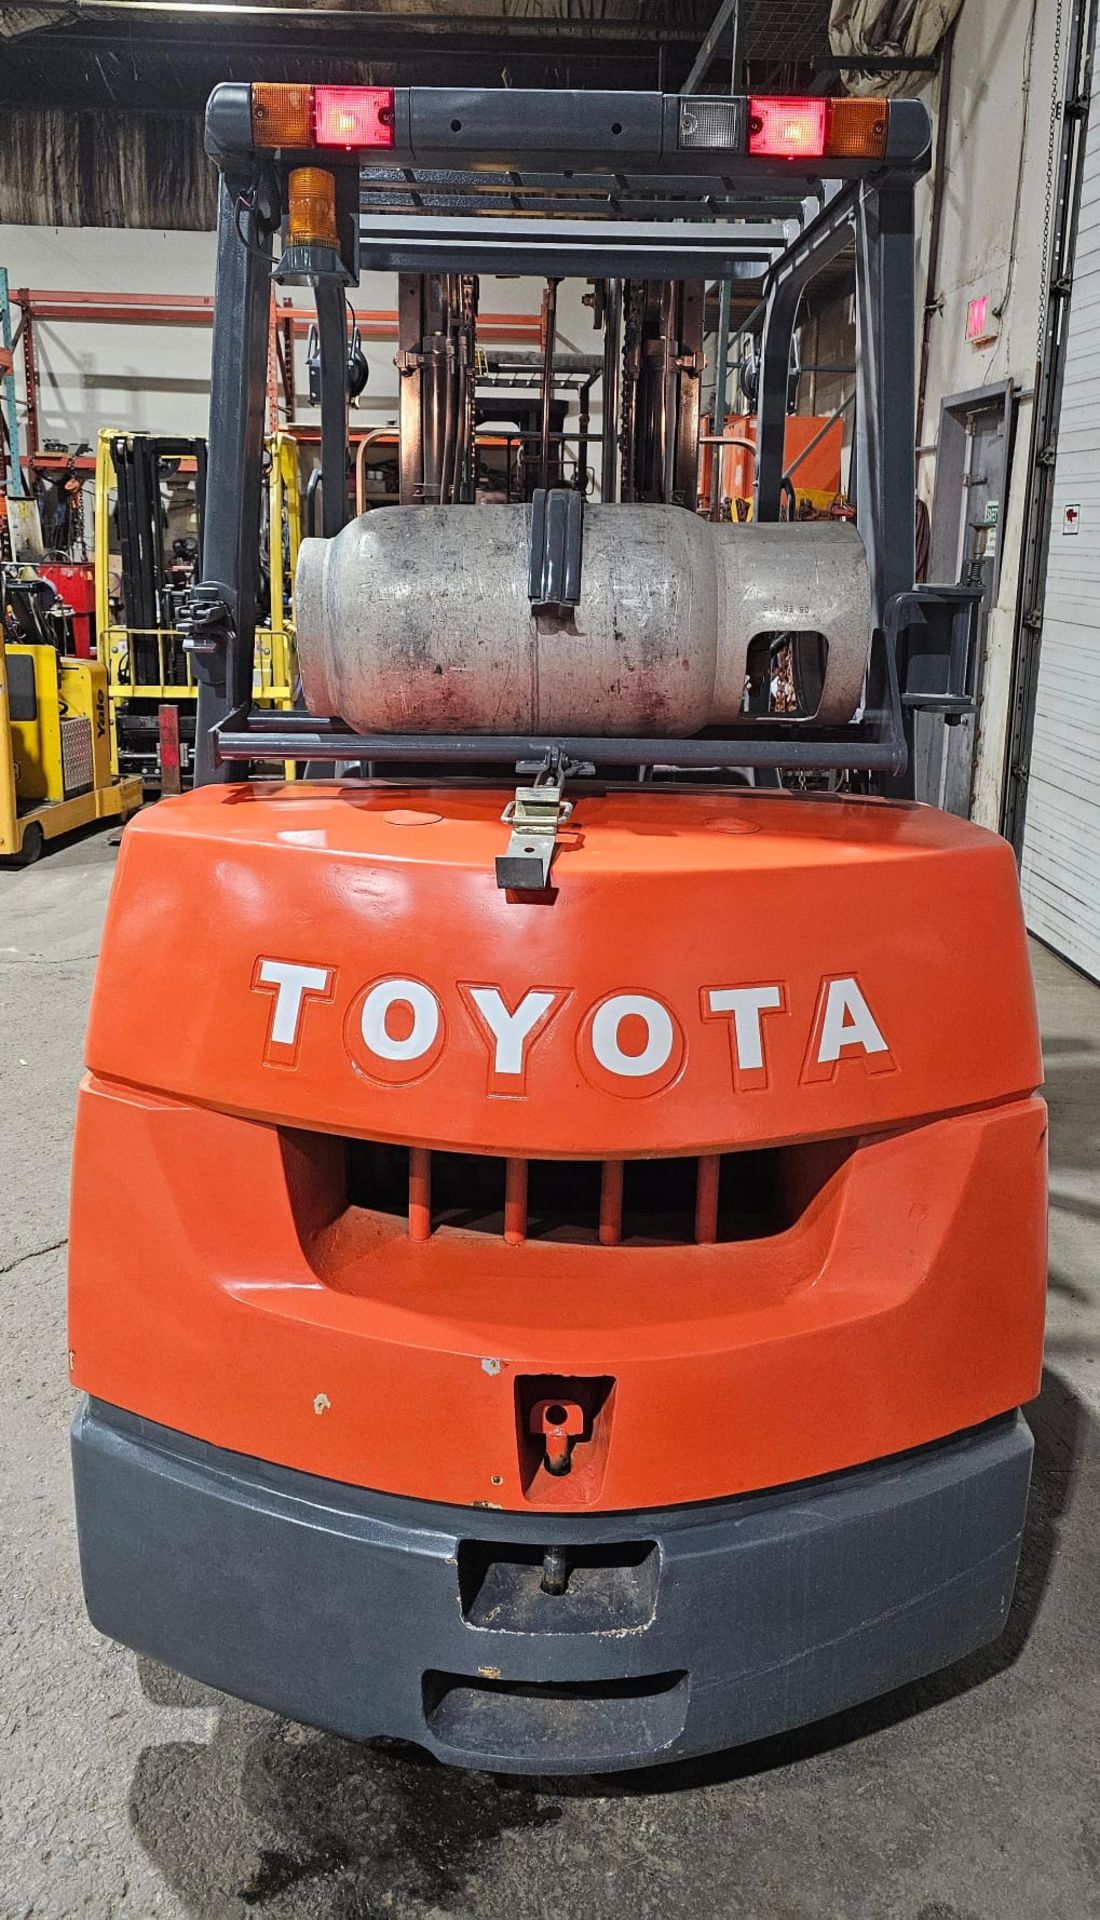 Toyota 7,000lbs Capacity LPG (Propane) Forklift with sideshift 60" Forks & 3-STAGE MAST 187" load - Image 3 of 5